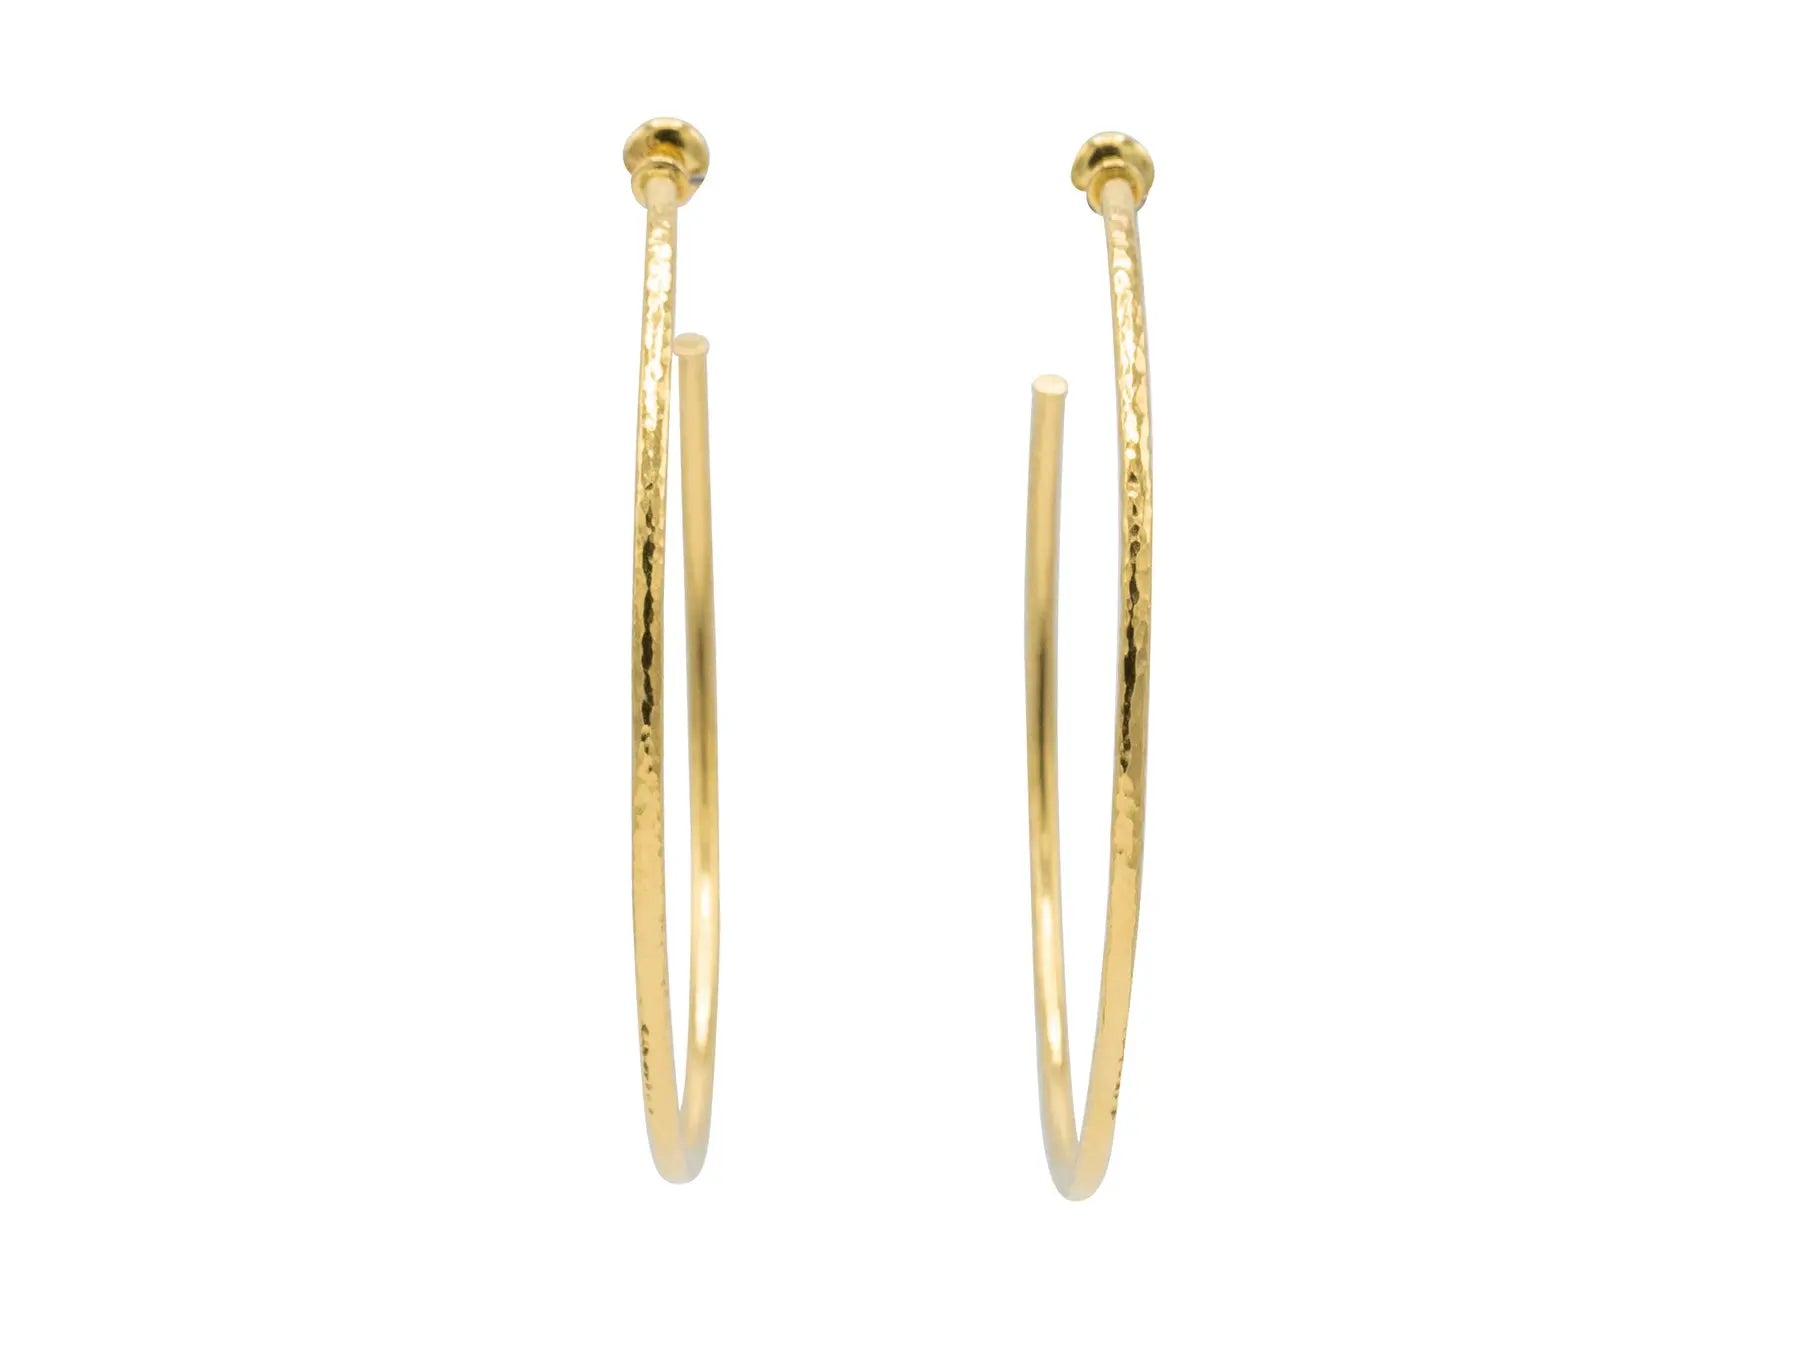 These Hoops are staples in your jewelry box. These are 24k yellow gold by Gurhan. Hoop Earrings in 22k yellow gold and are from the Vertigo Collection. The length on these hoops are 2.75 inches